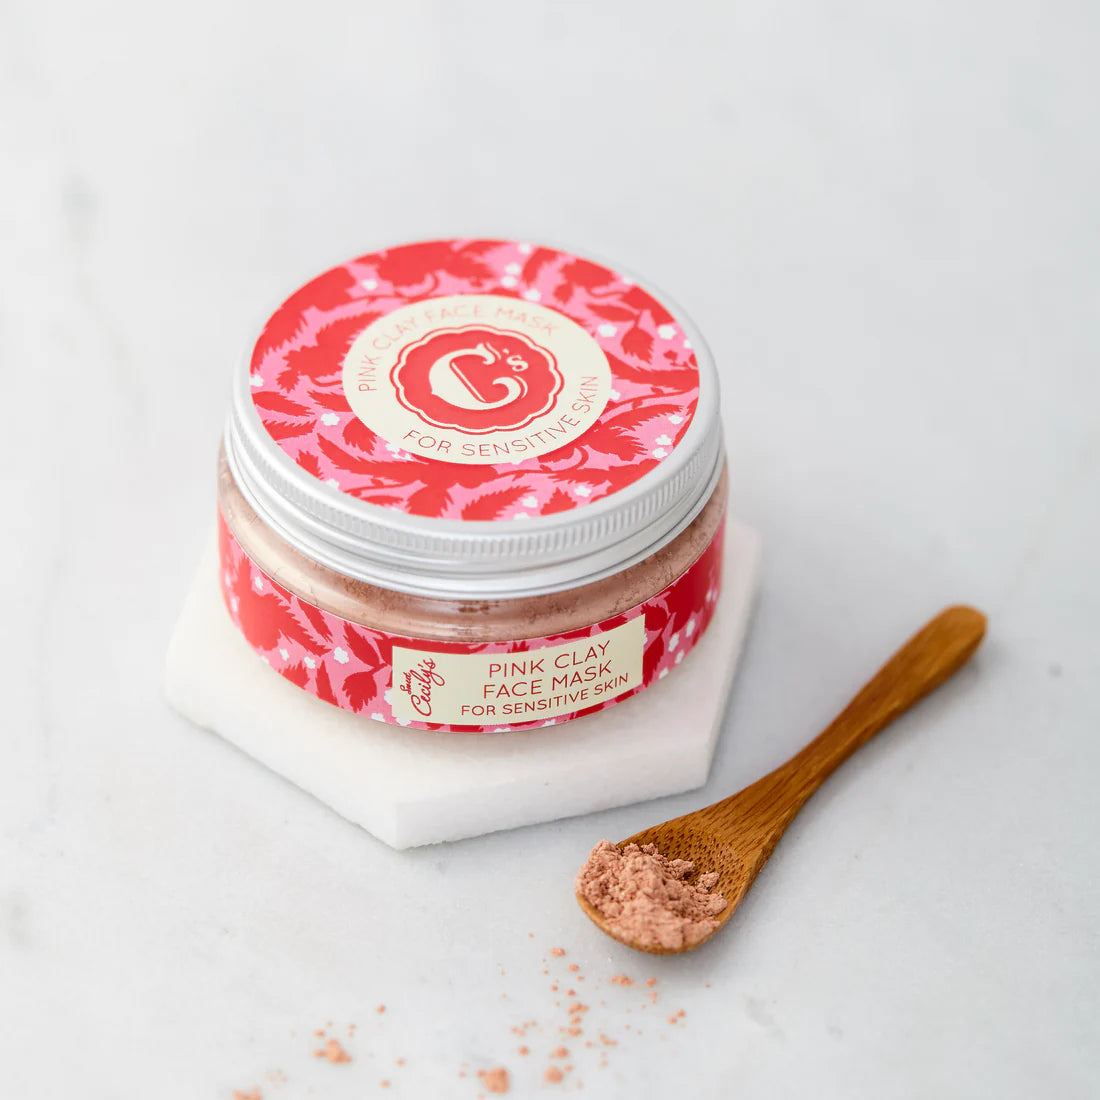 Sweet Cecily's Pink Clay Face Mask